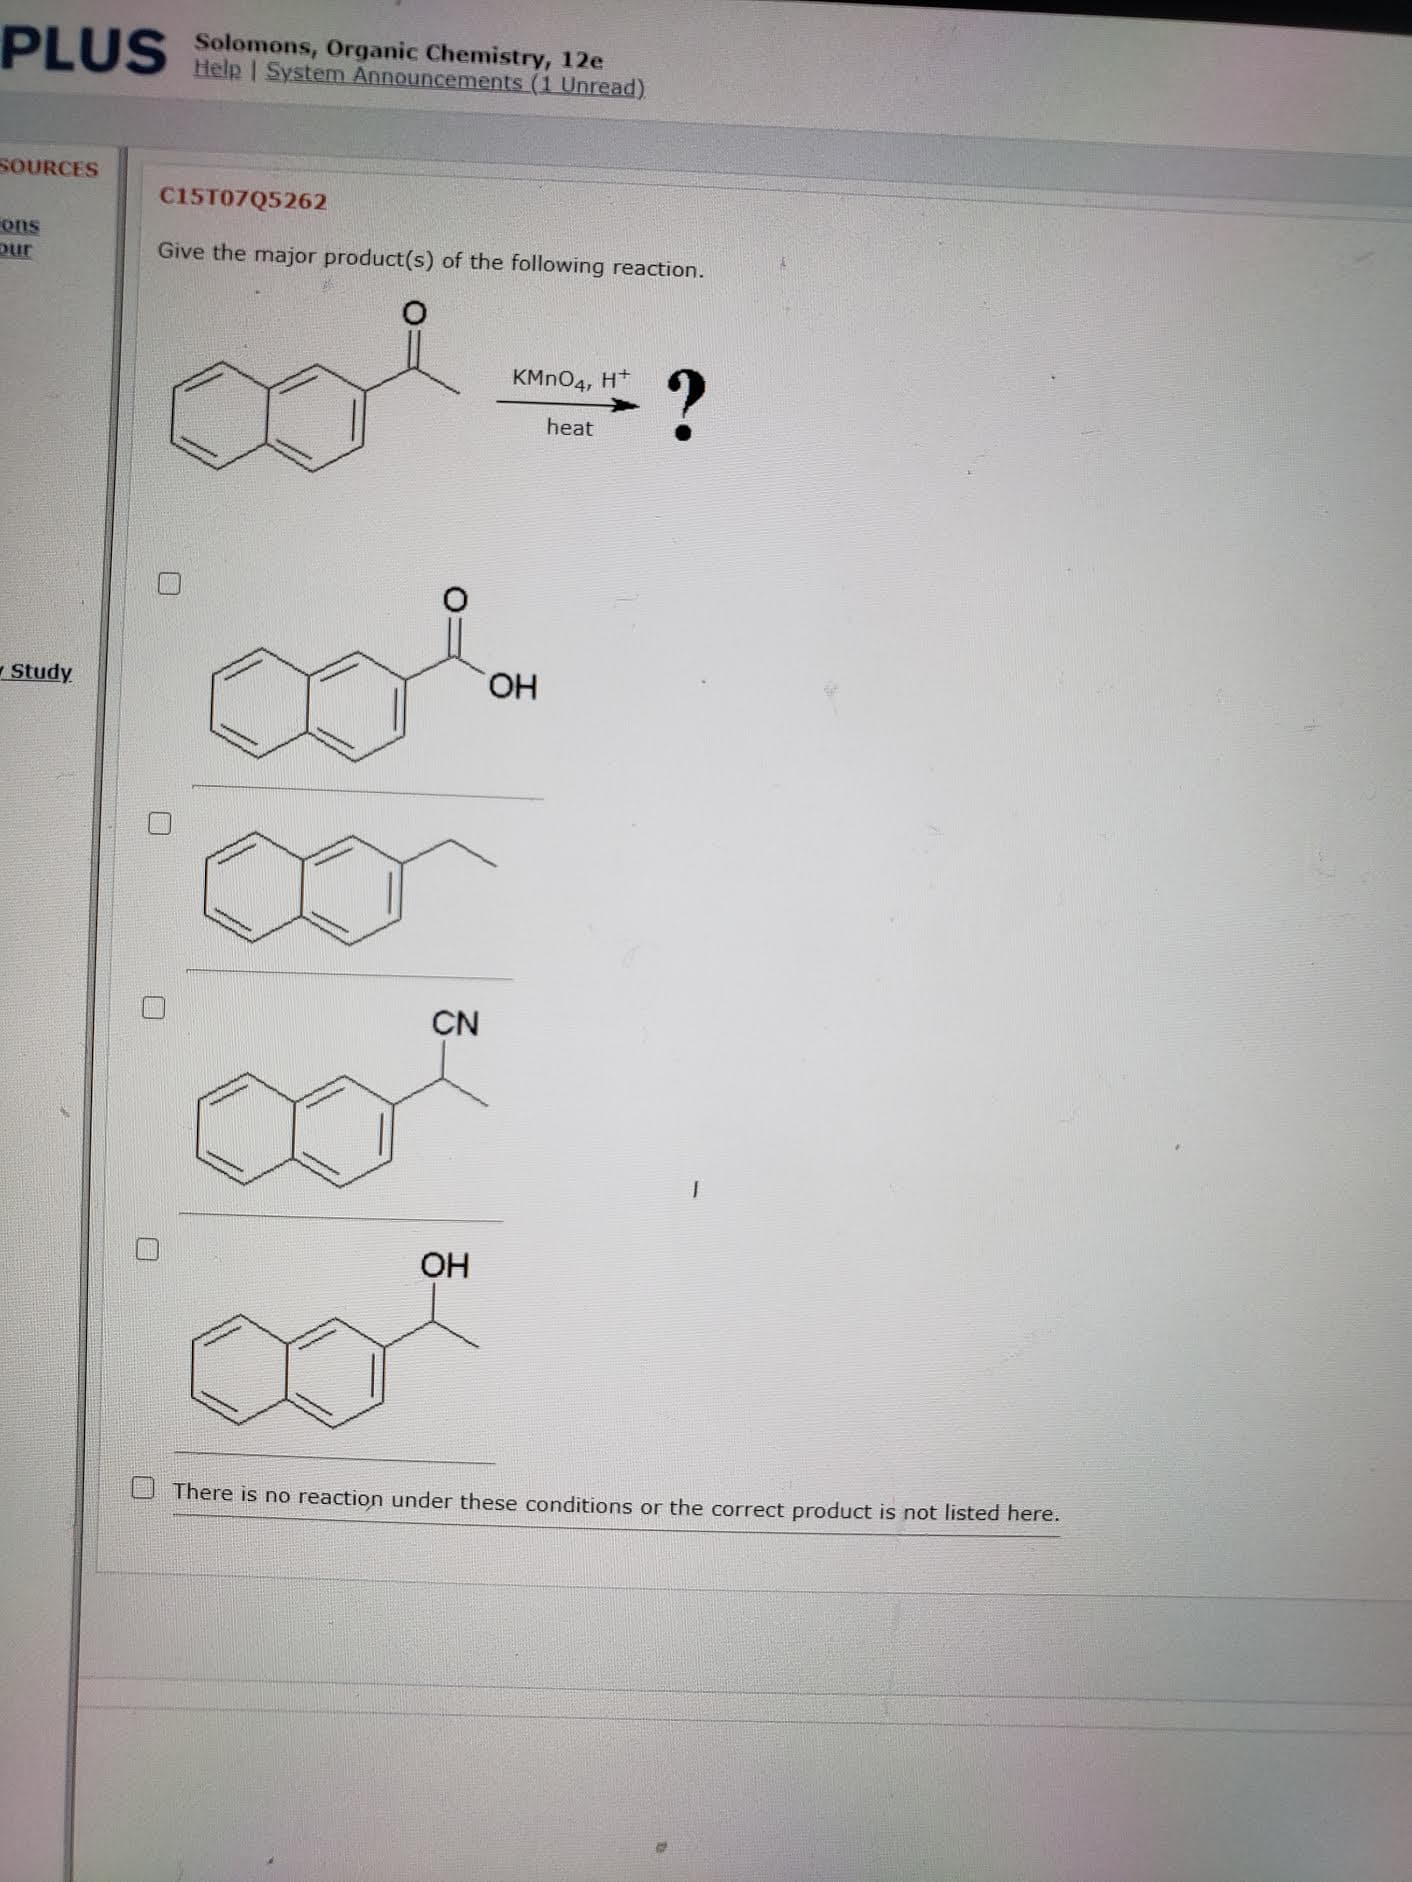 Give the major product(s) of the following reaction.
KMN04, H*
heat
HO,
CN
OH
8.
There is no reaction under these conditions or the correct product is not listed here.
